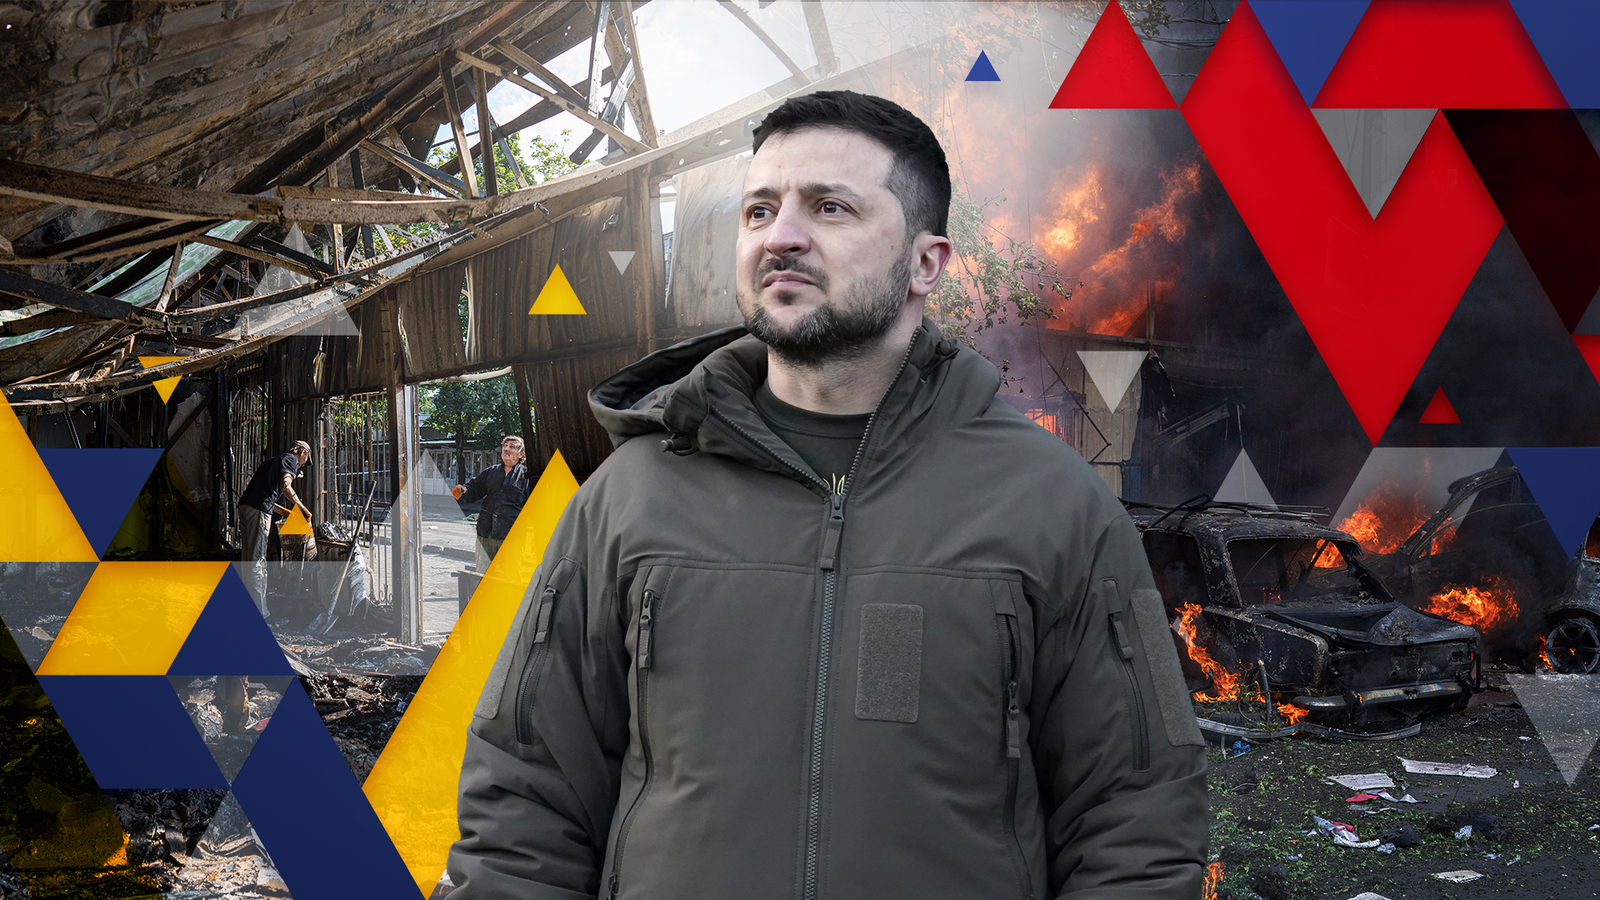 The West remains committed to Ukraine's counteroffensive - but there's sceptism over Zelenskyy's ultimate objectives